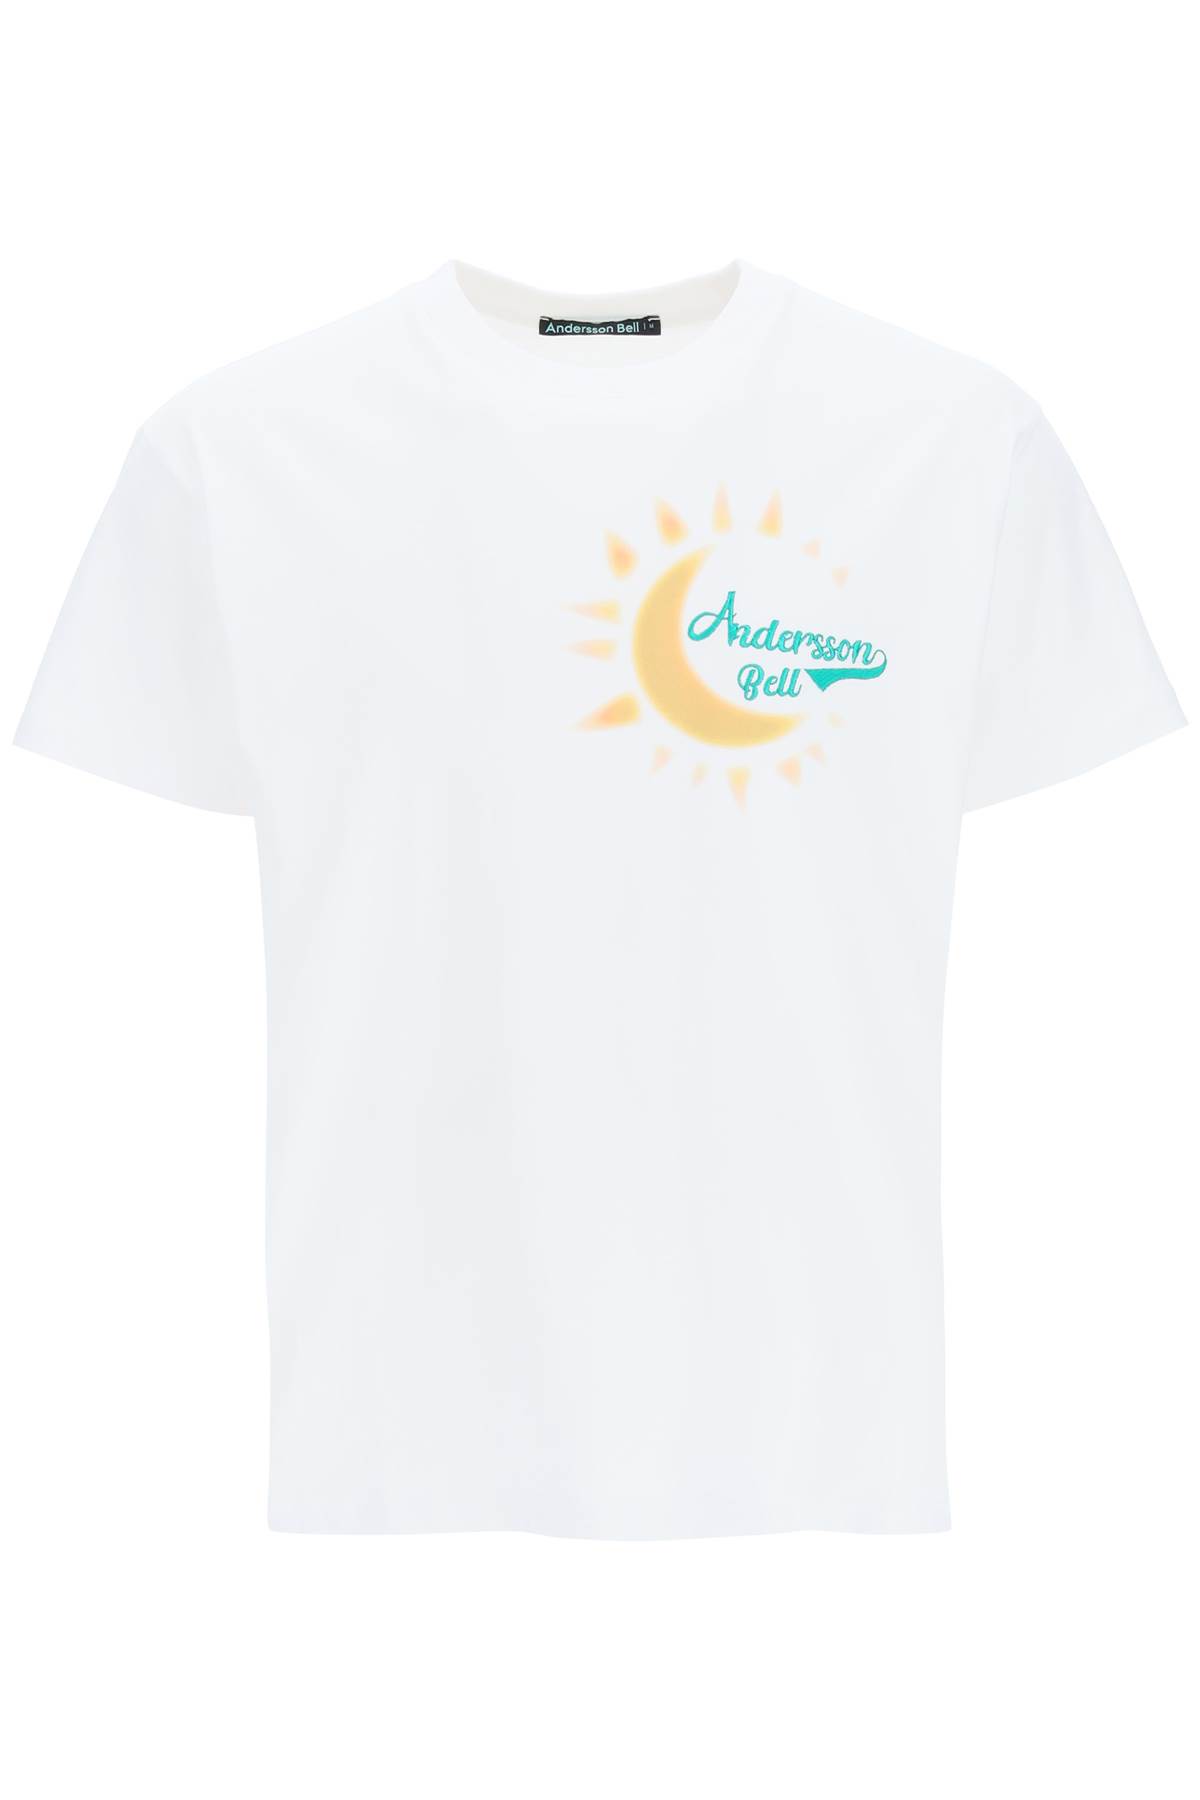 Andersson Bell Embroidered Logo T-shirt